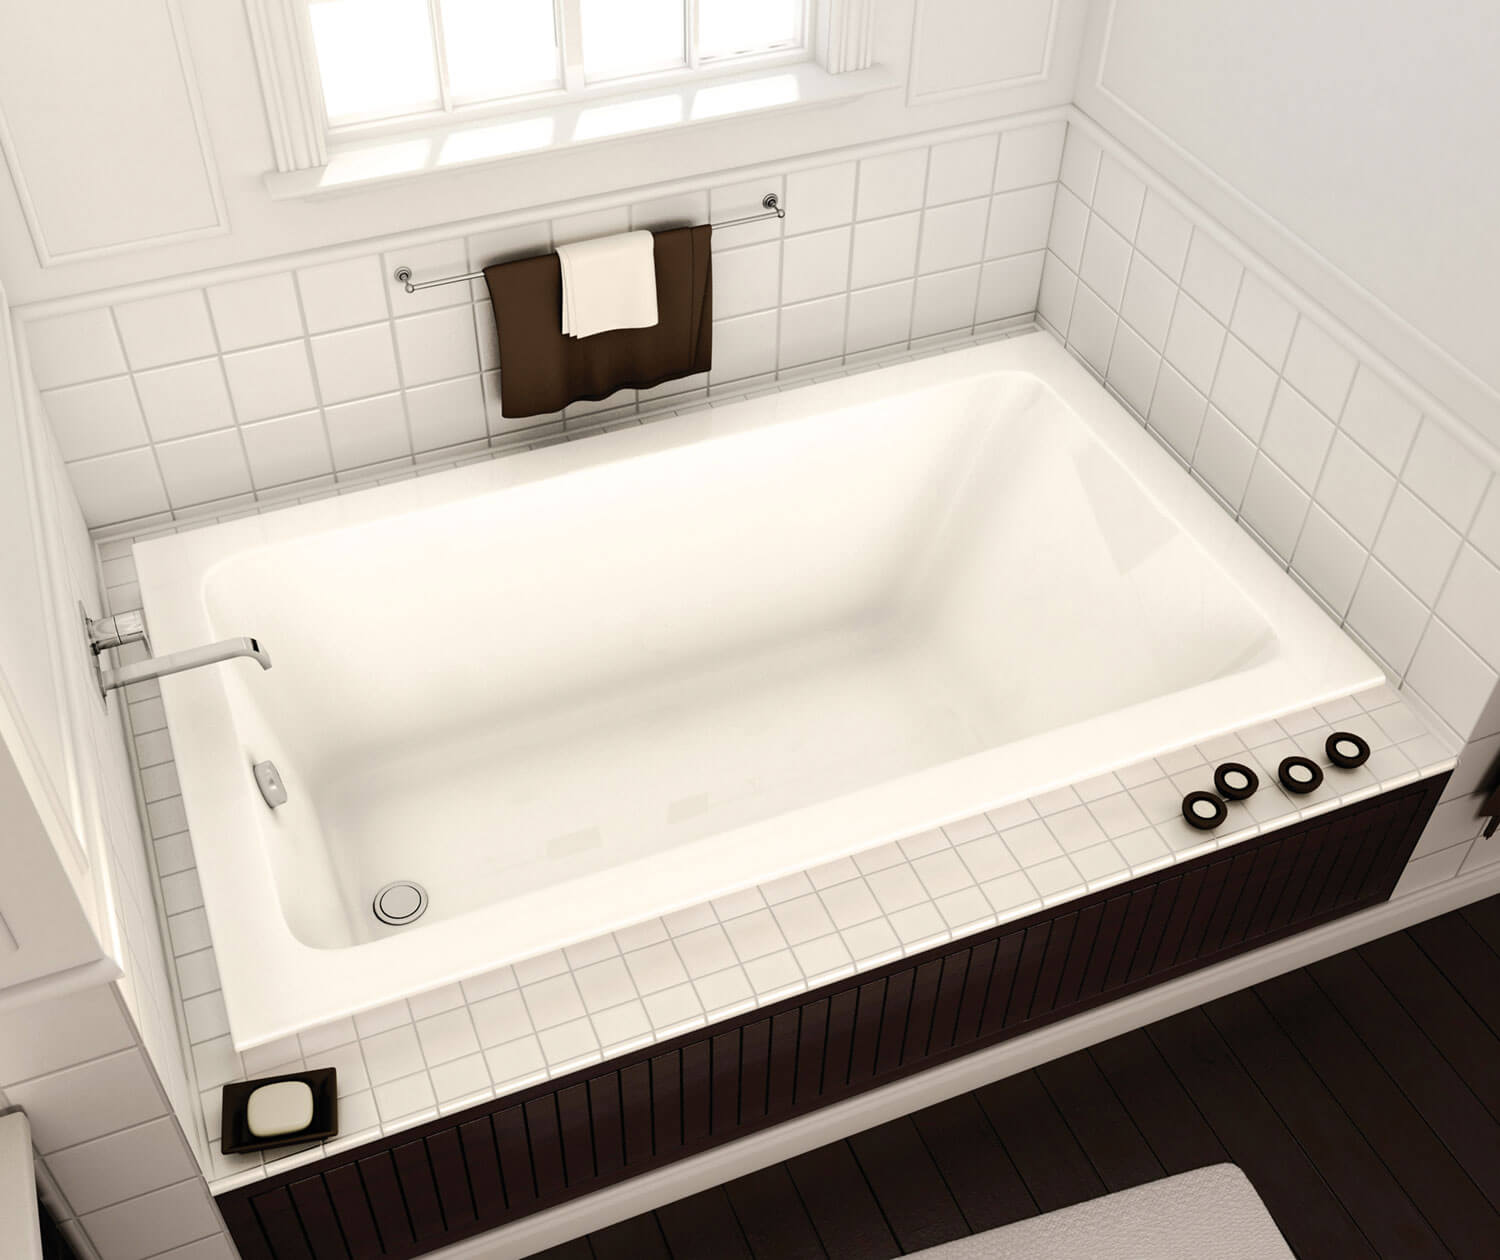 https://res.cloudinary.com/american-bath-group/image/upload/websites-product-info-and-content/maax/products/bathtubs/101460/images/maax-101460-001-4.jpg